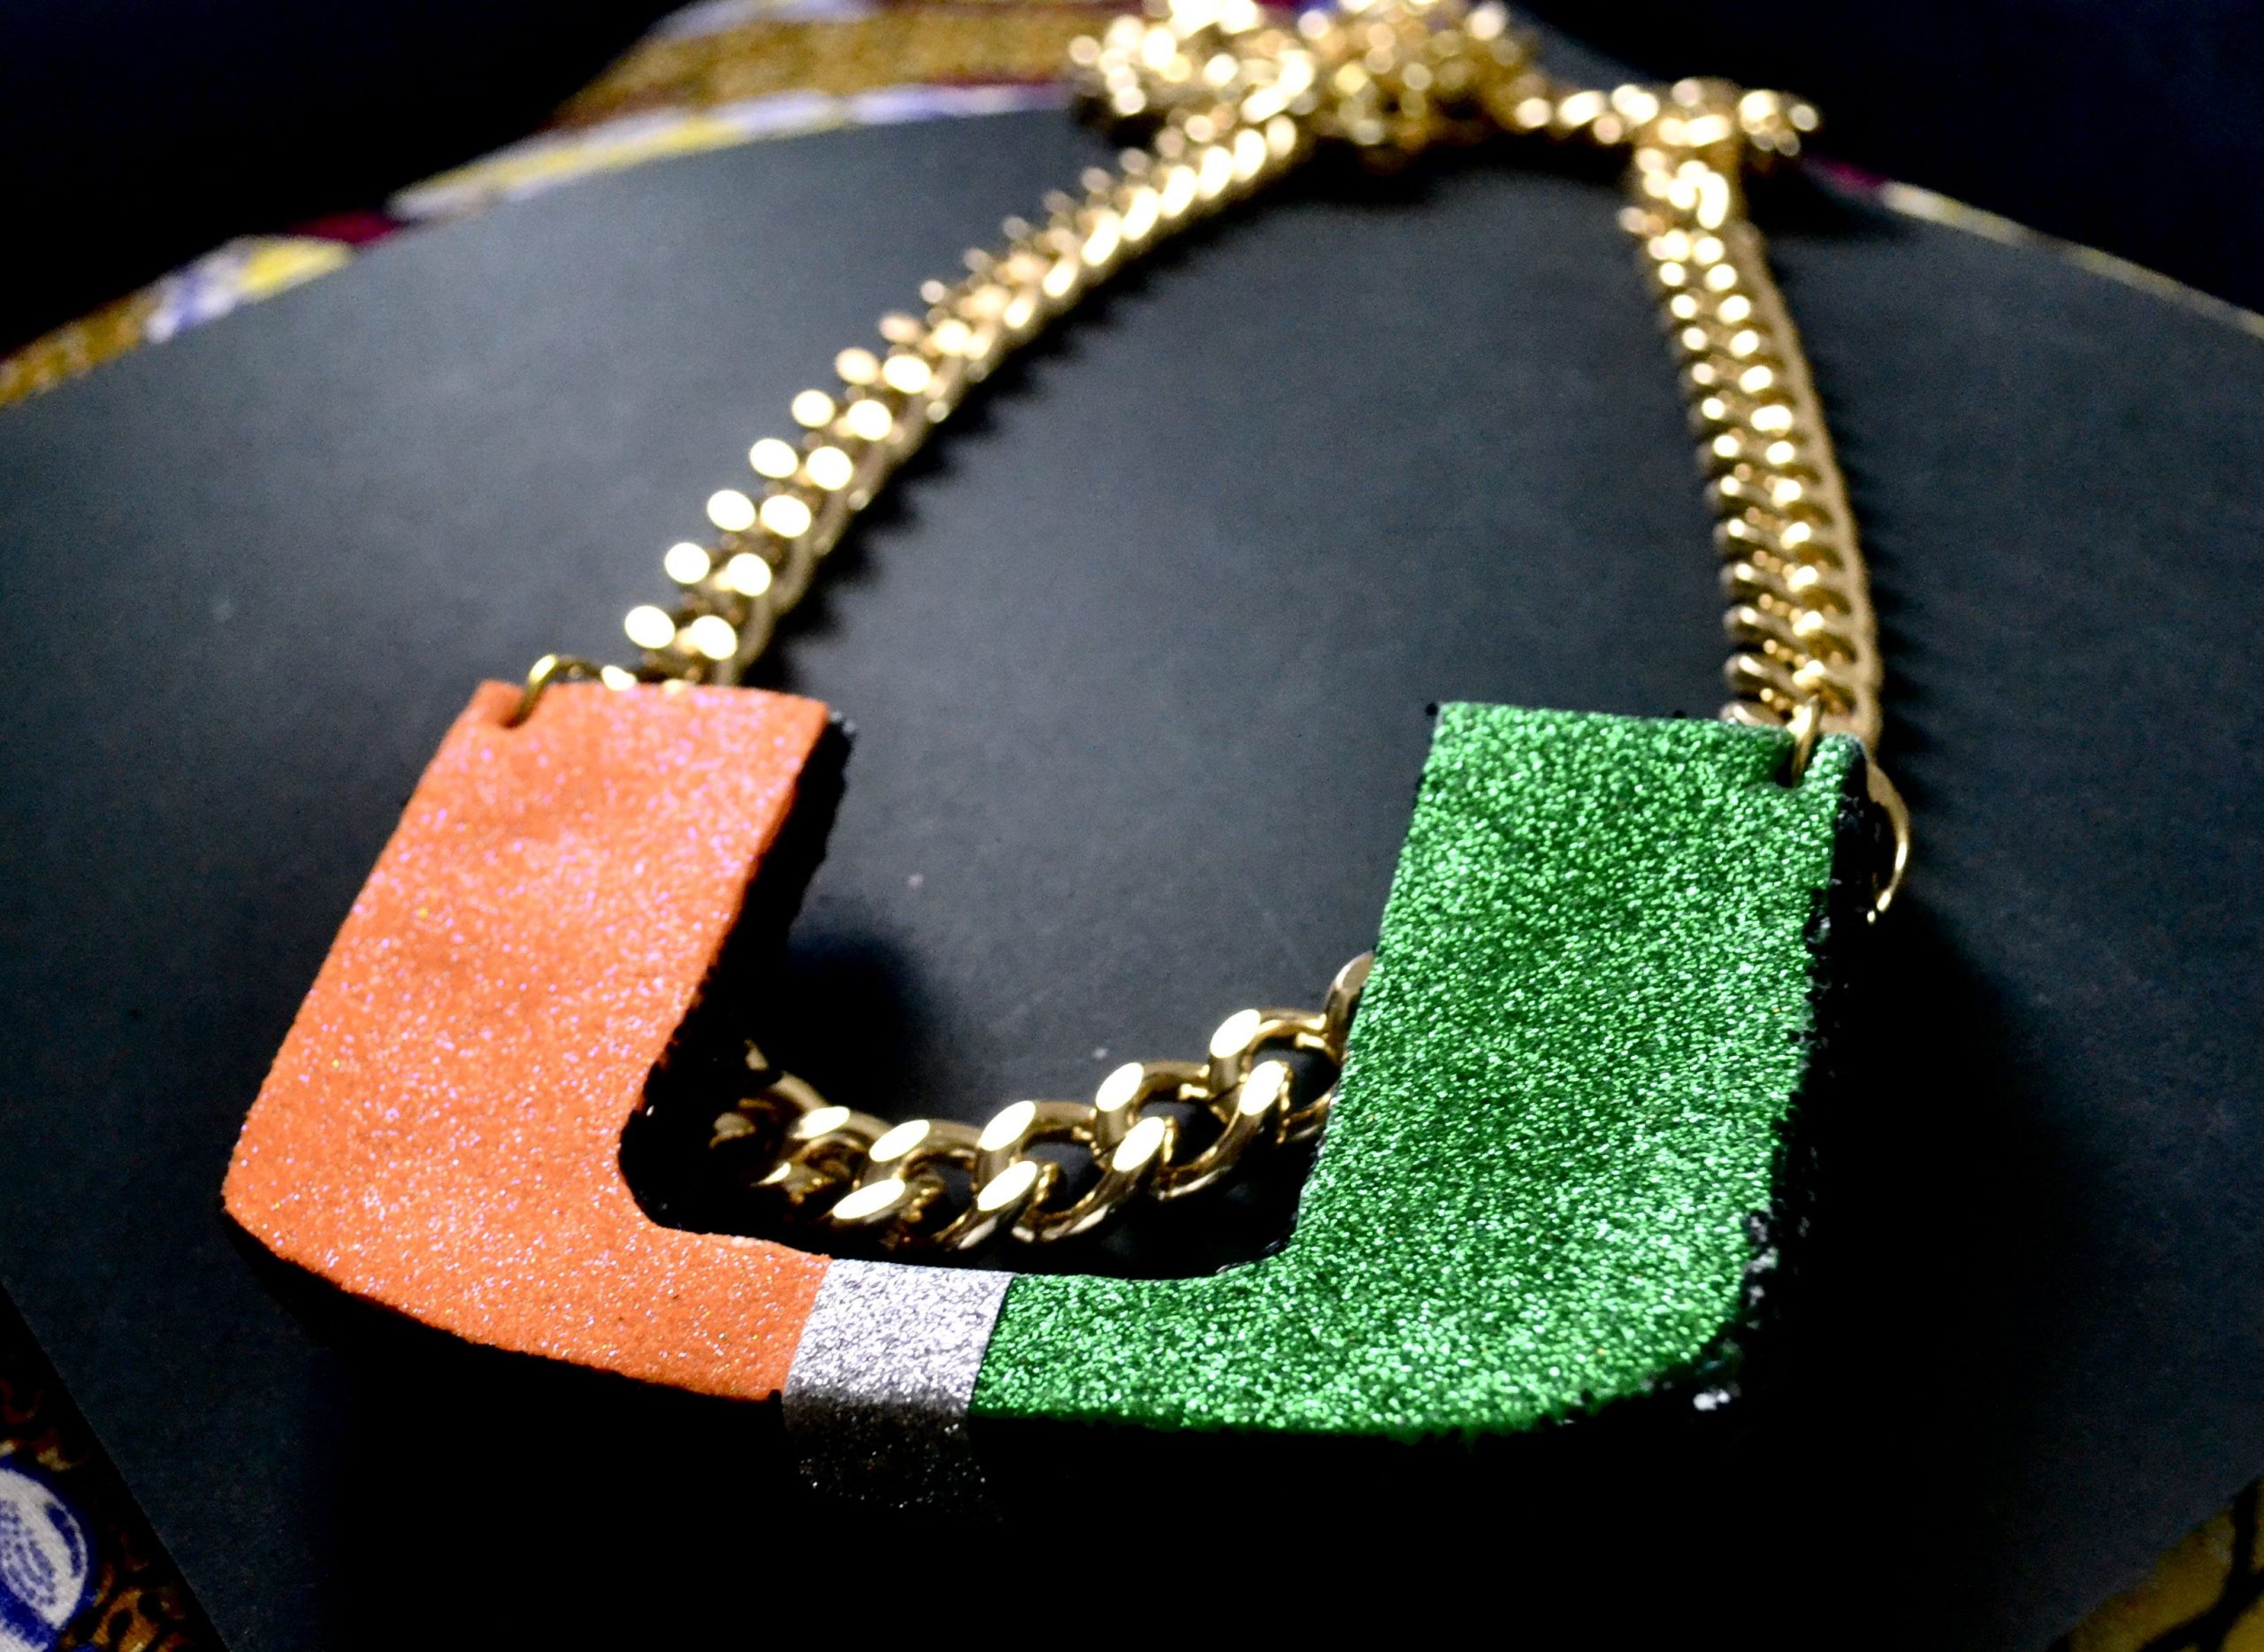 History of the Turnover Chain